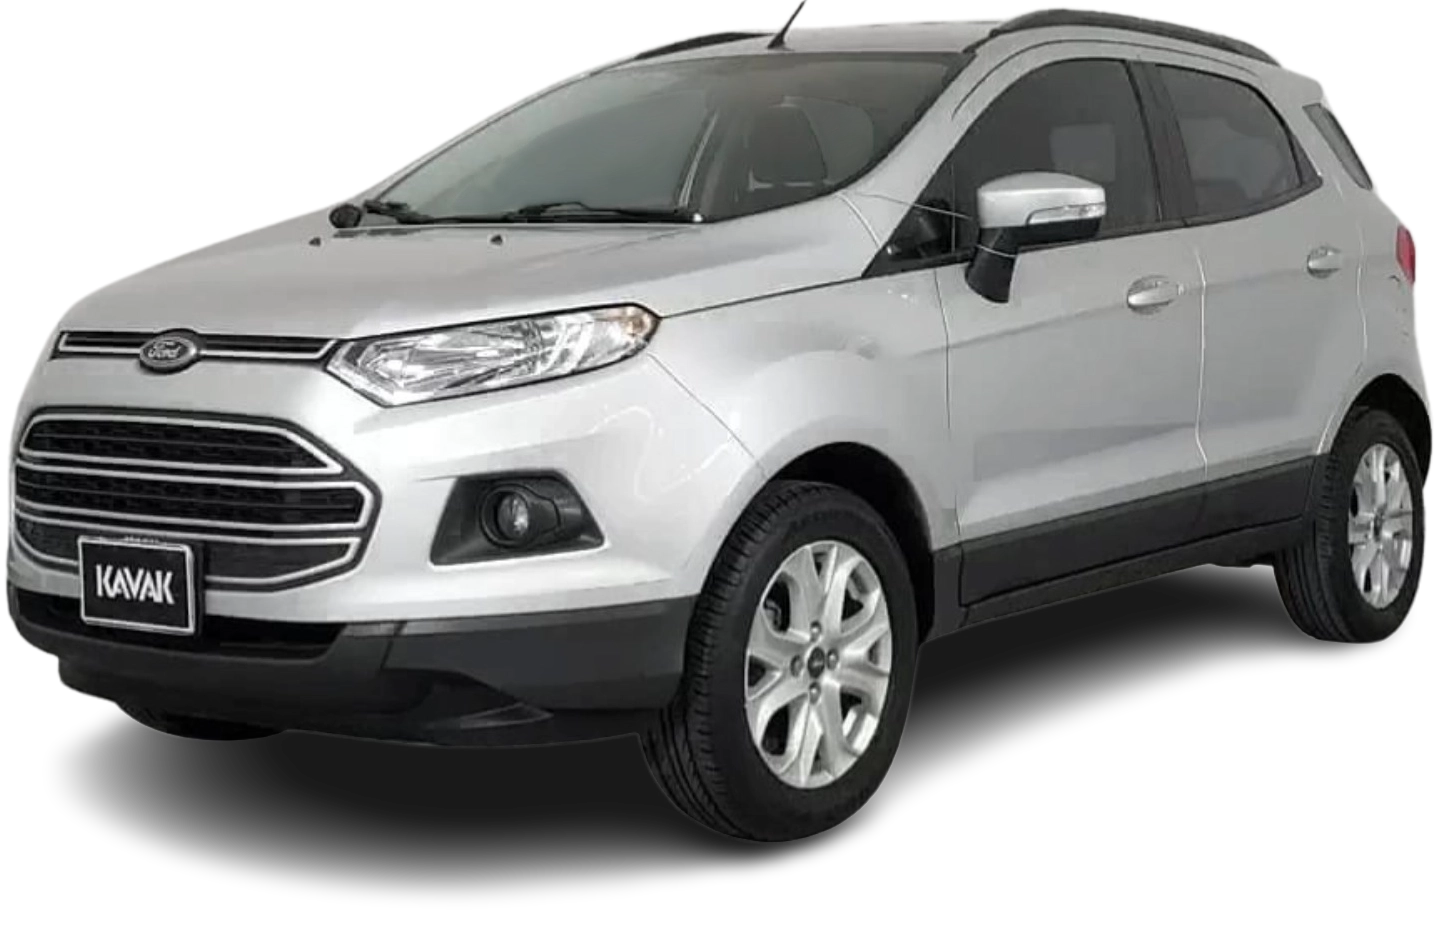 Ford Eco Sport SUV 2017 2016 2015 2014 2013